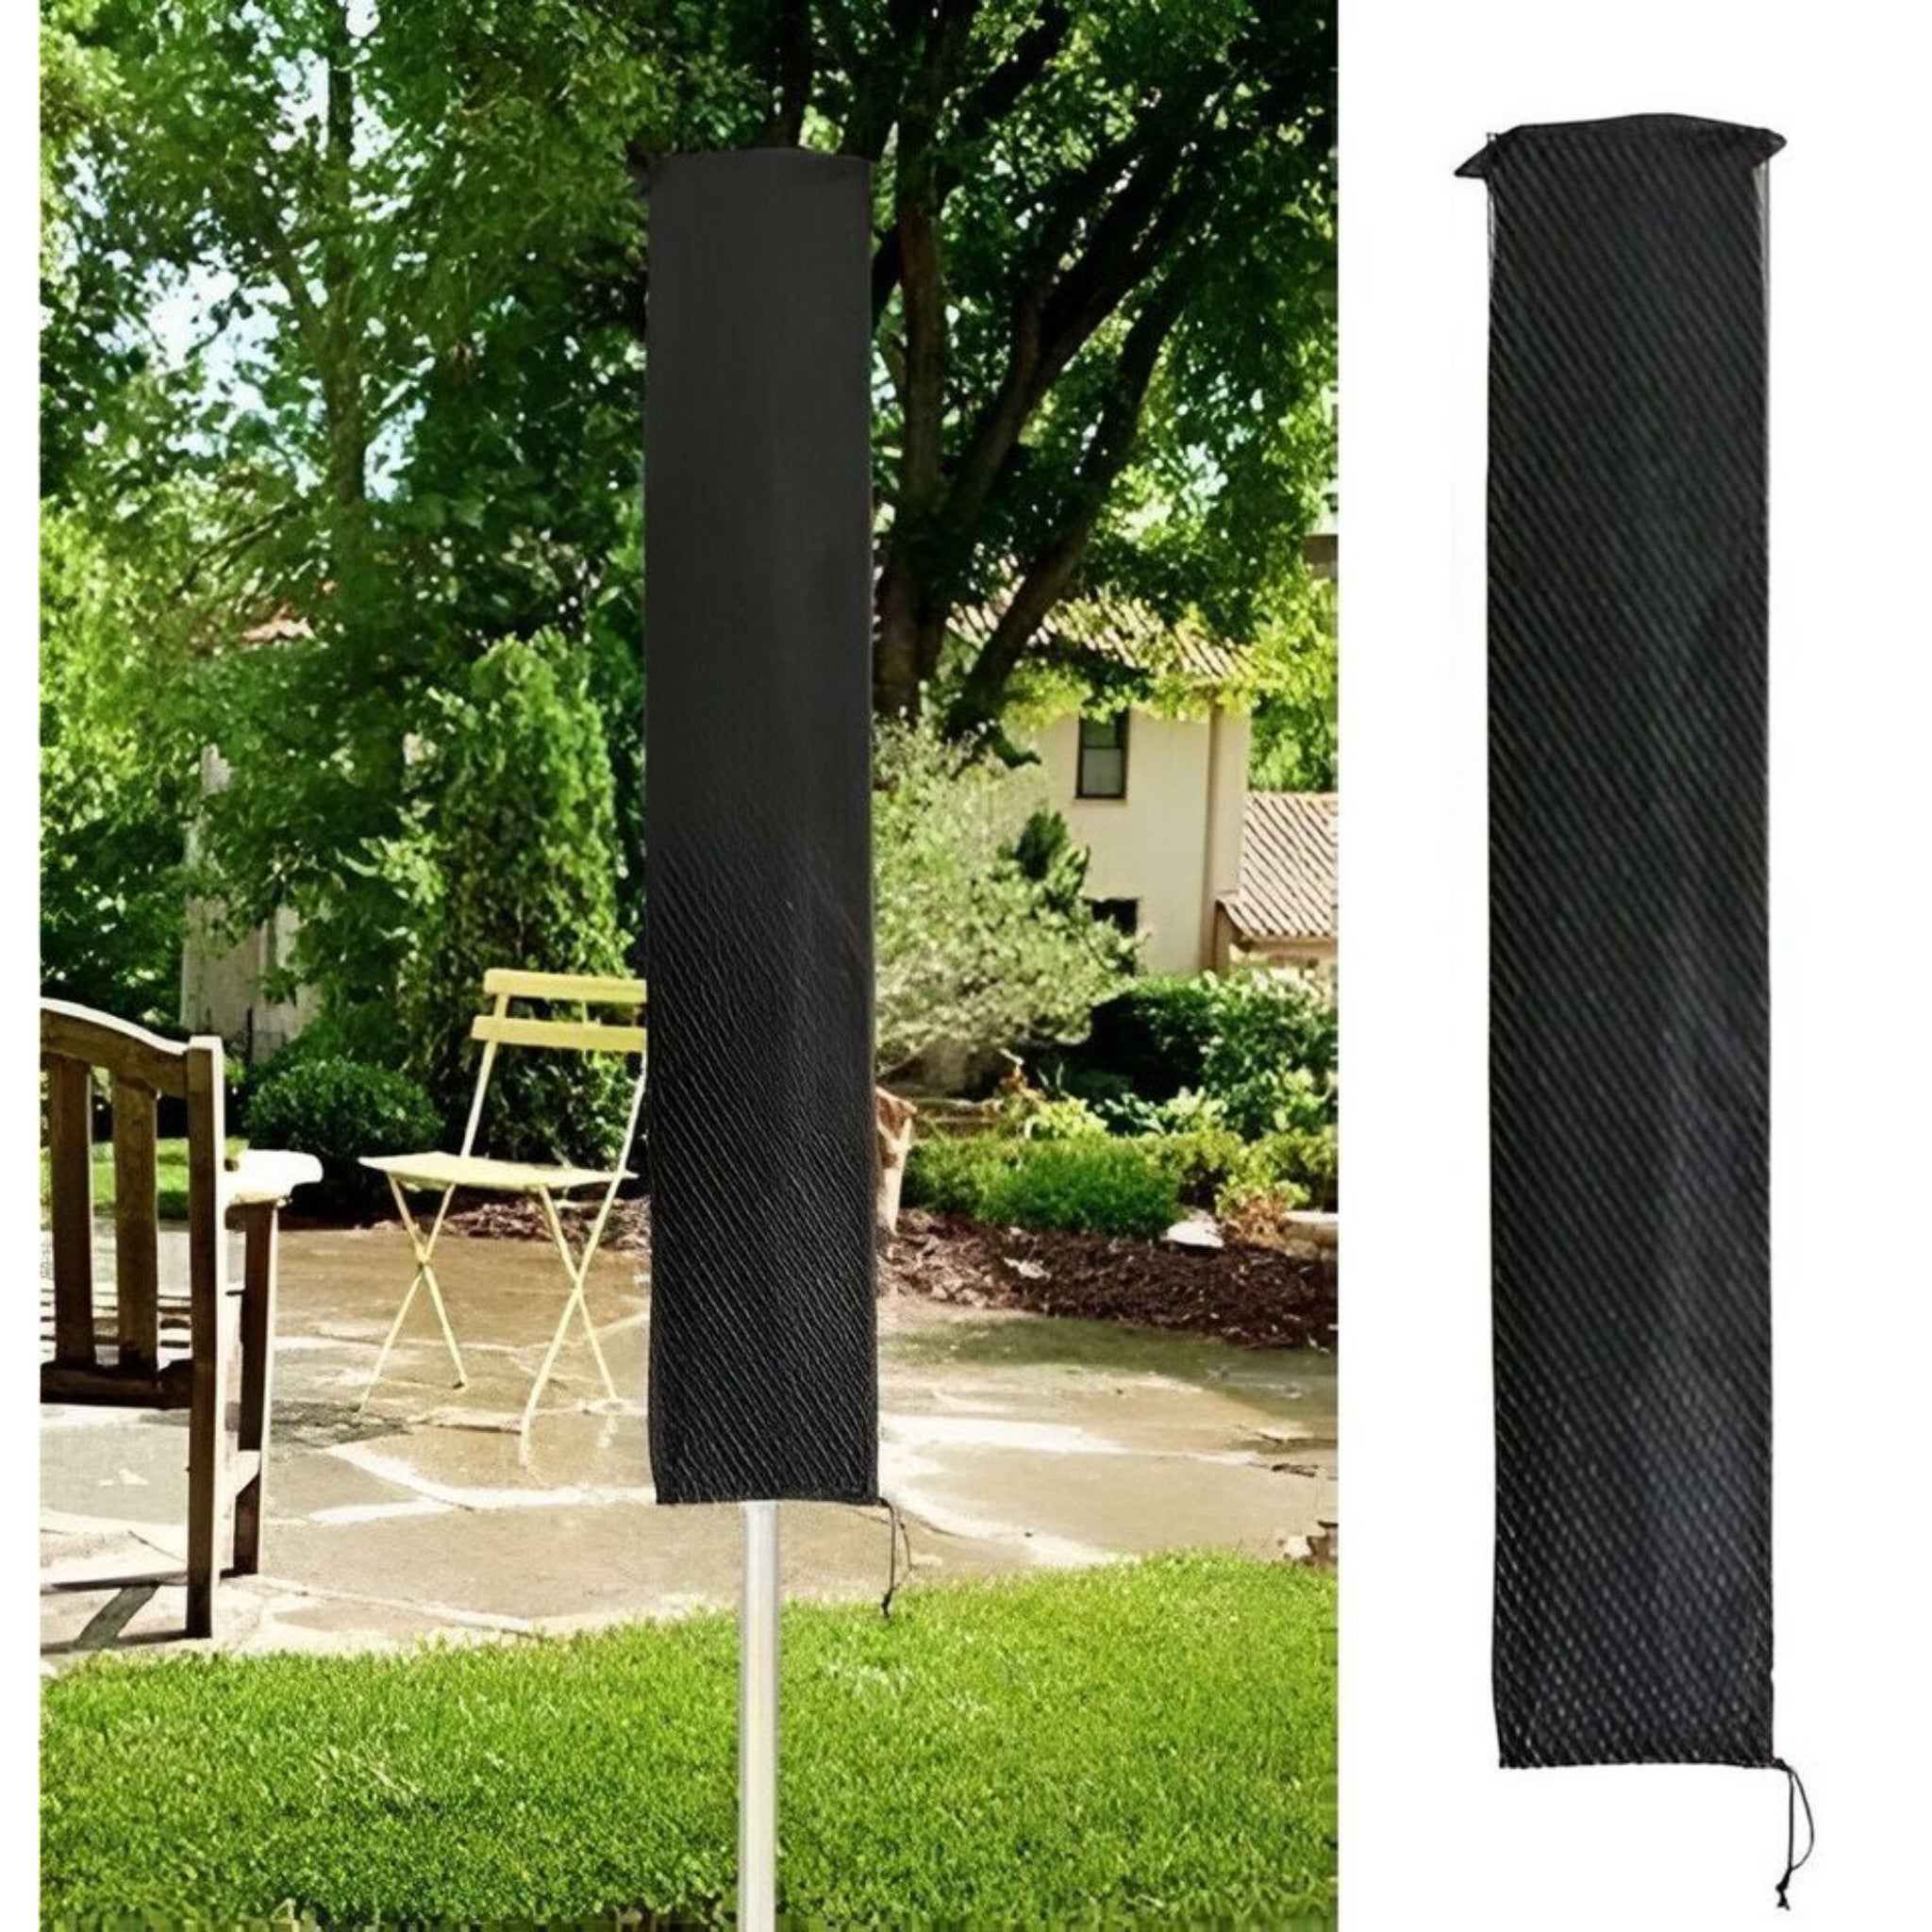 Beclen Harp Waterproof Heavy Duty Rotary Washing Line Cover Clothes Airer Garden Parasol